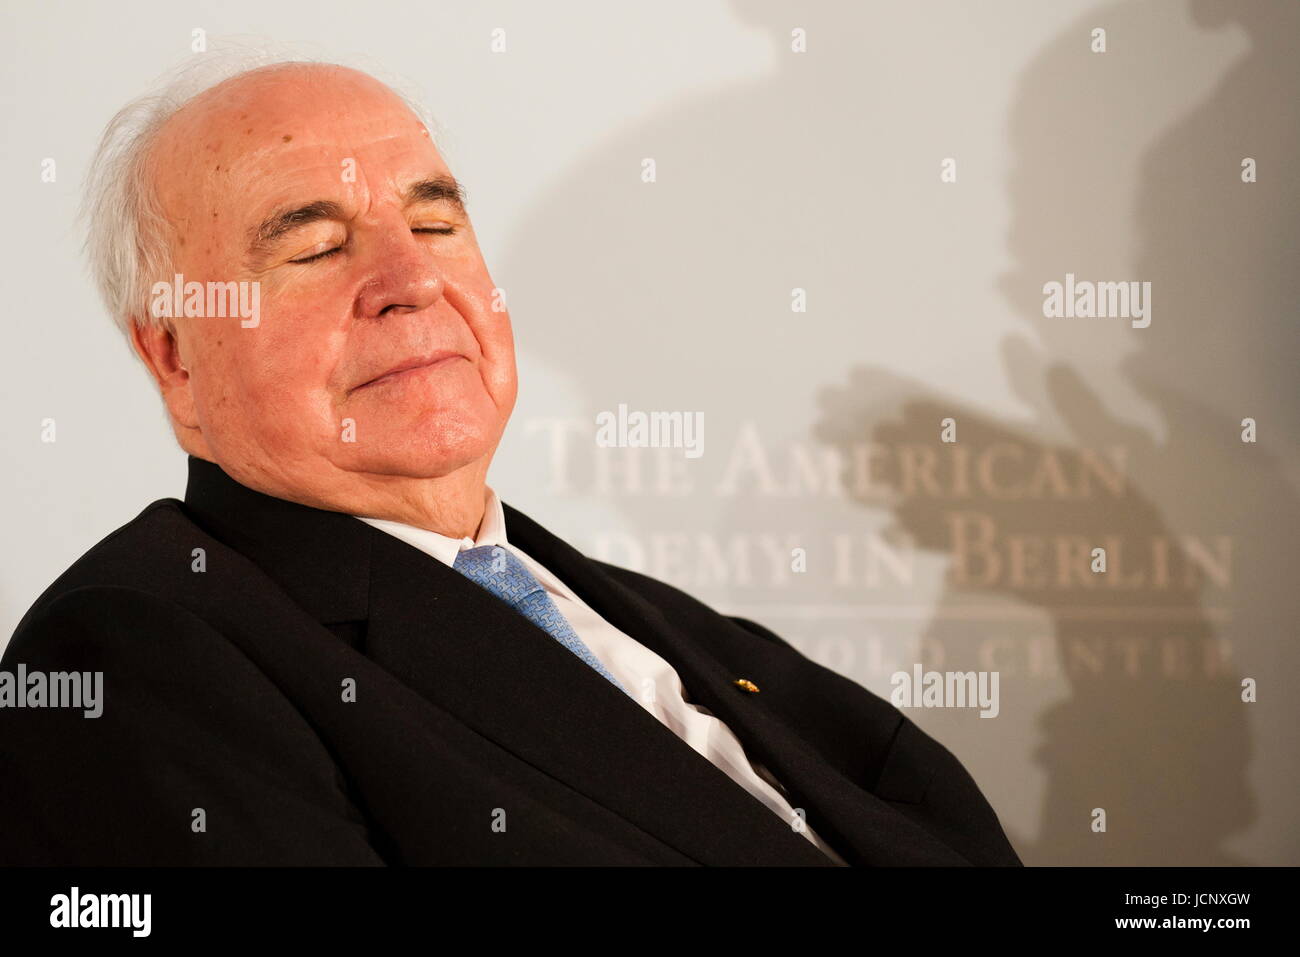 Berlin, Germany. 16th May, 2011. Awardee former chancellor Helmut Kohl (CDU) receives the Henry-A.-Kissinger Award 2011 on 16 May 2011. Credit: dpa/Alamy Live News Stock Photo